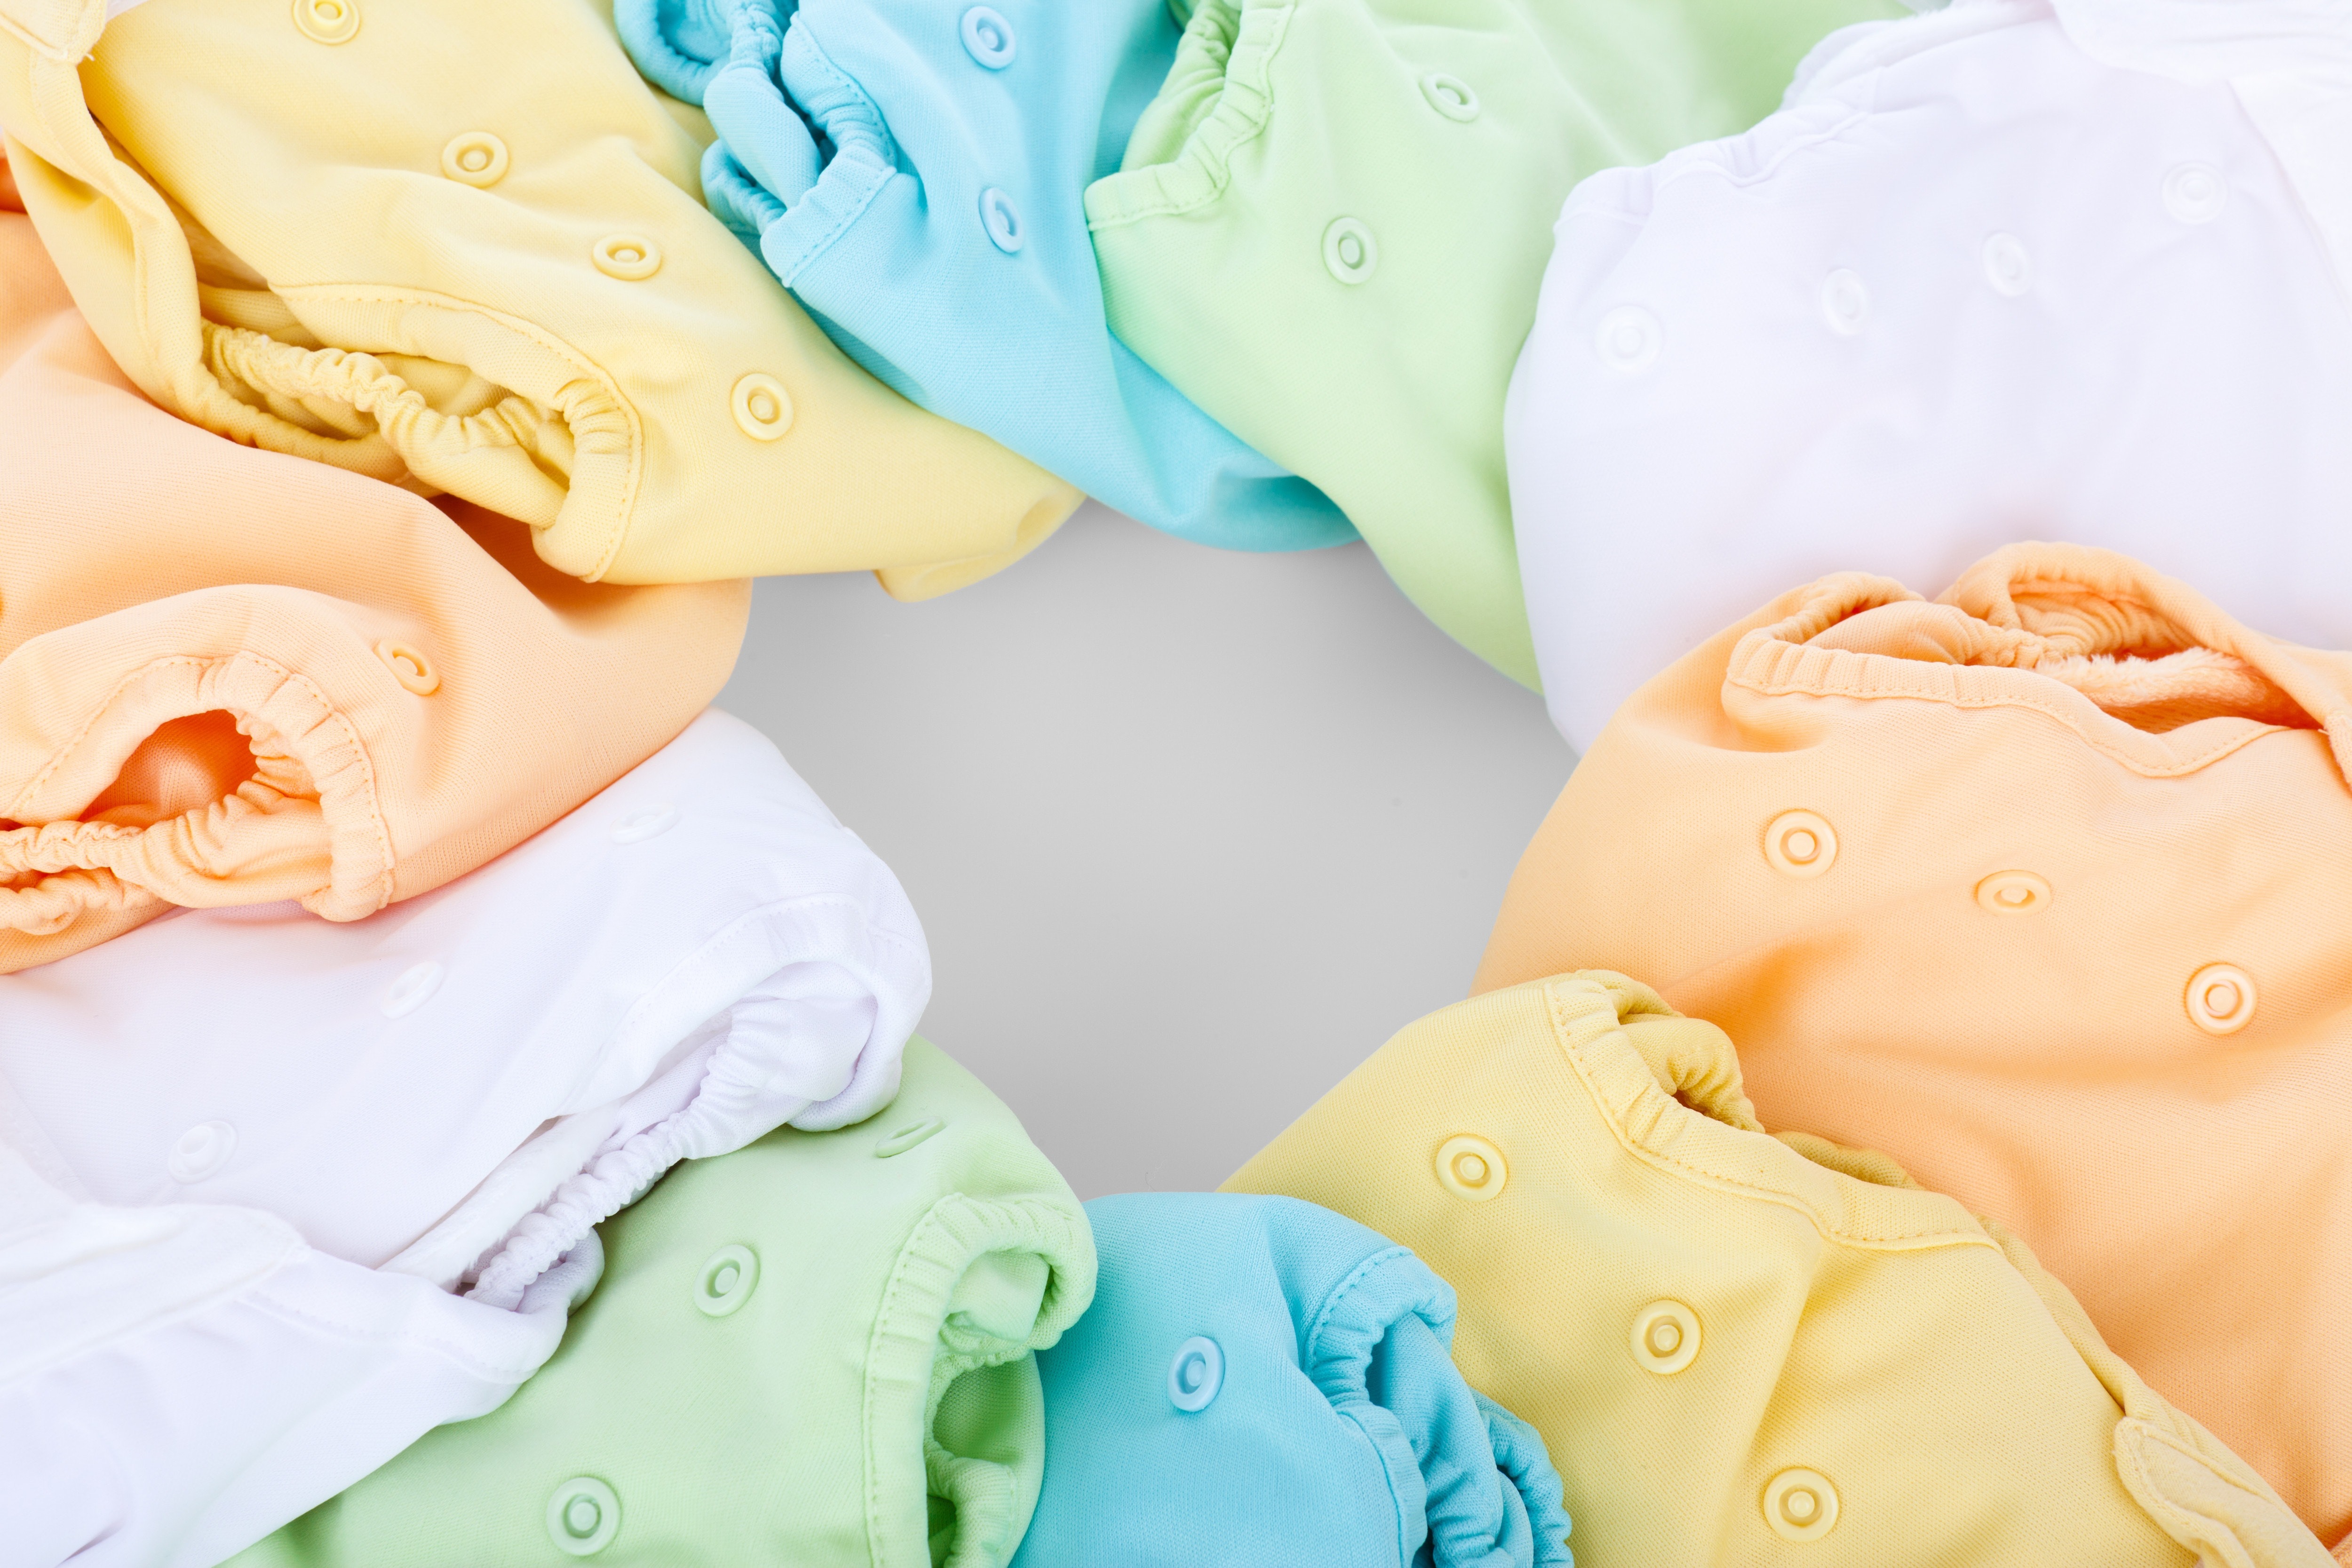 Sewing and using cloth diapers is easier than you think